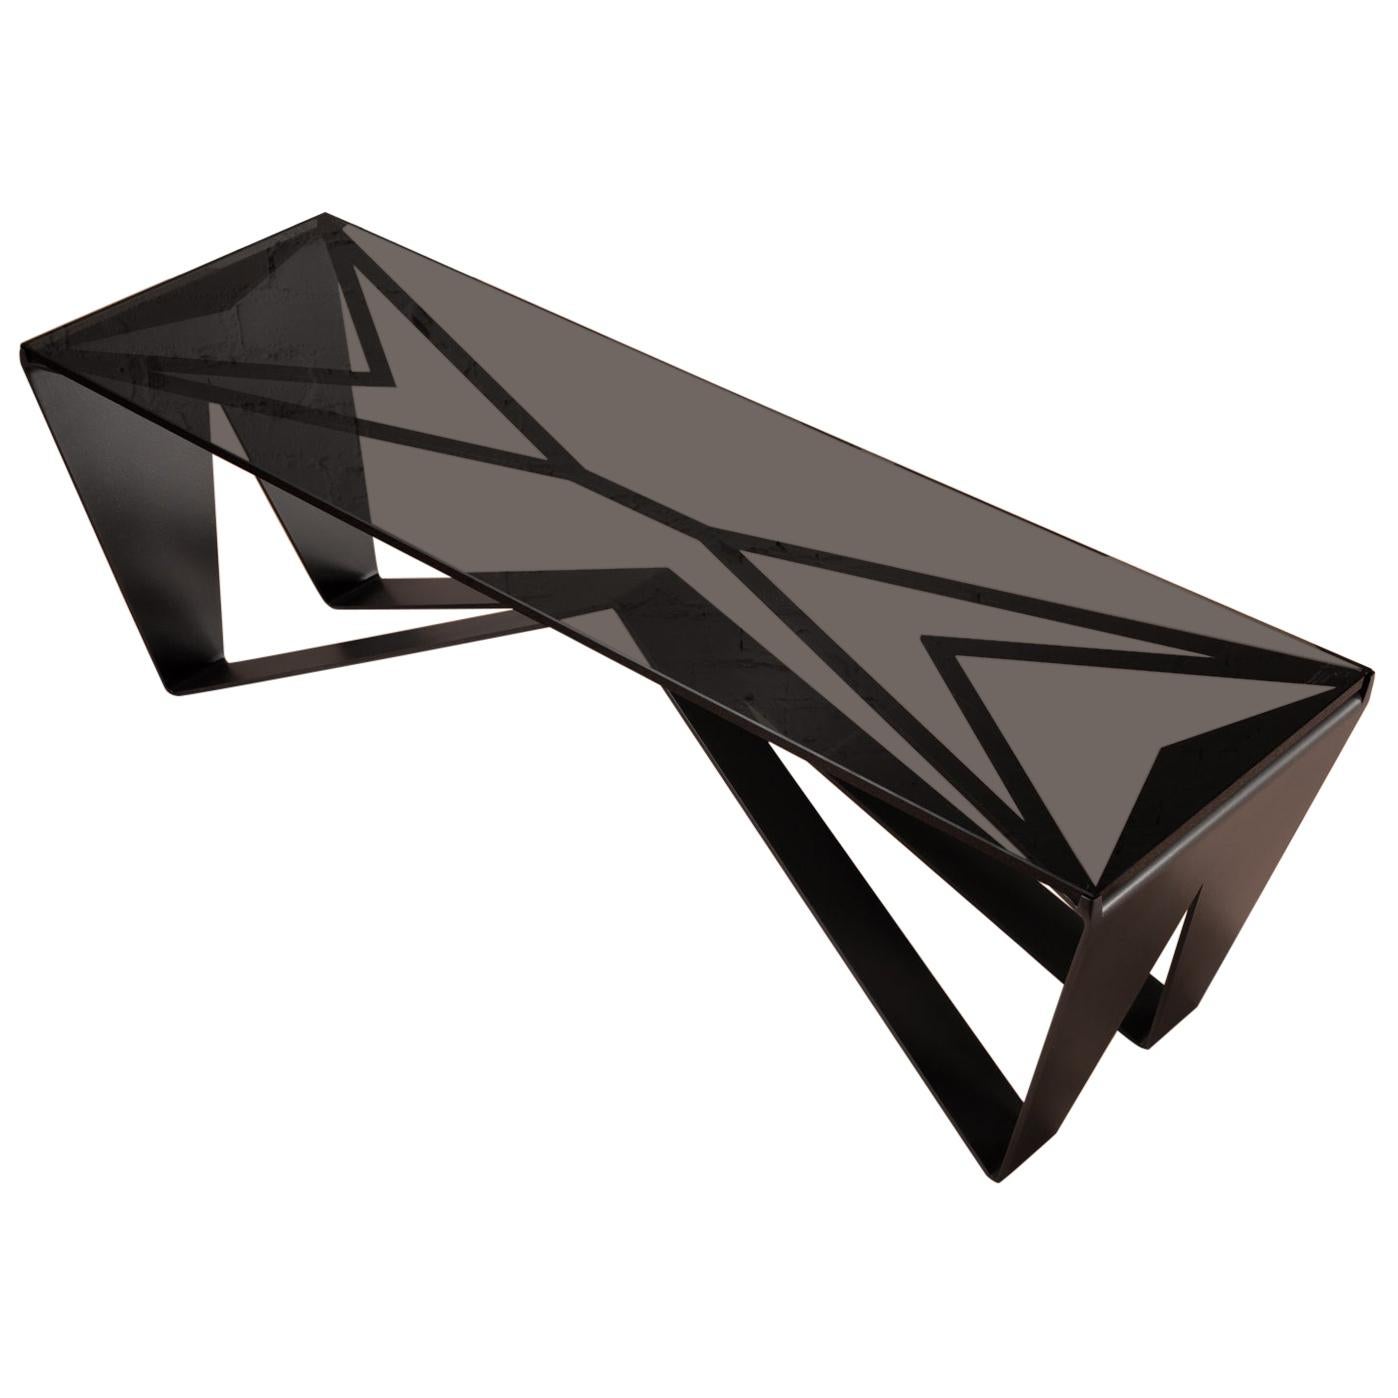 Domino Coffee Table in Blackened Steel Smoked Glass by Force/Collide